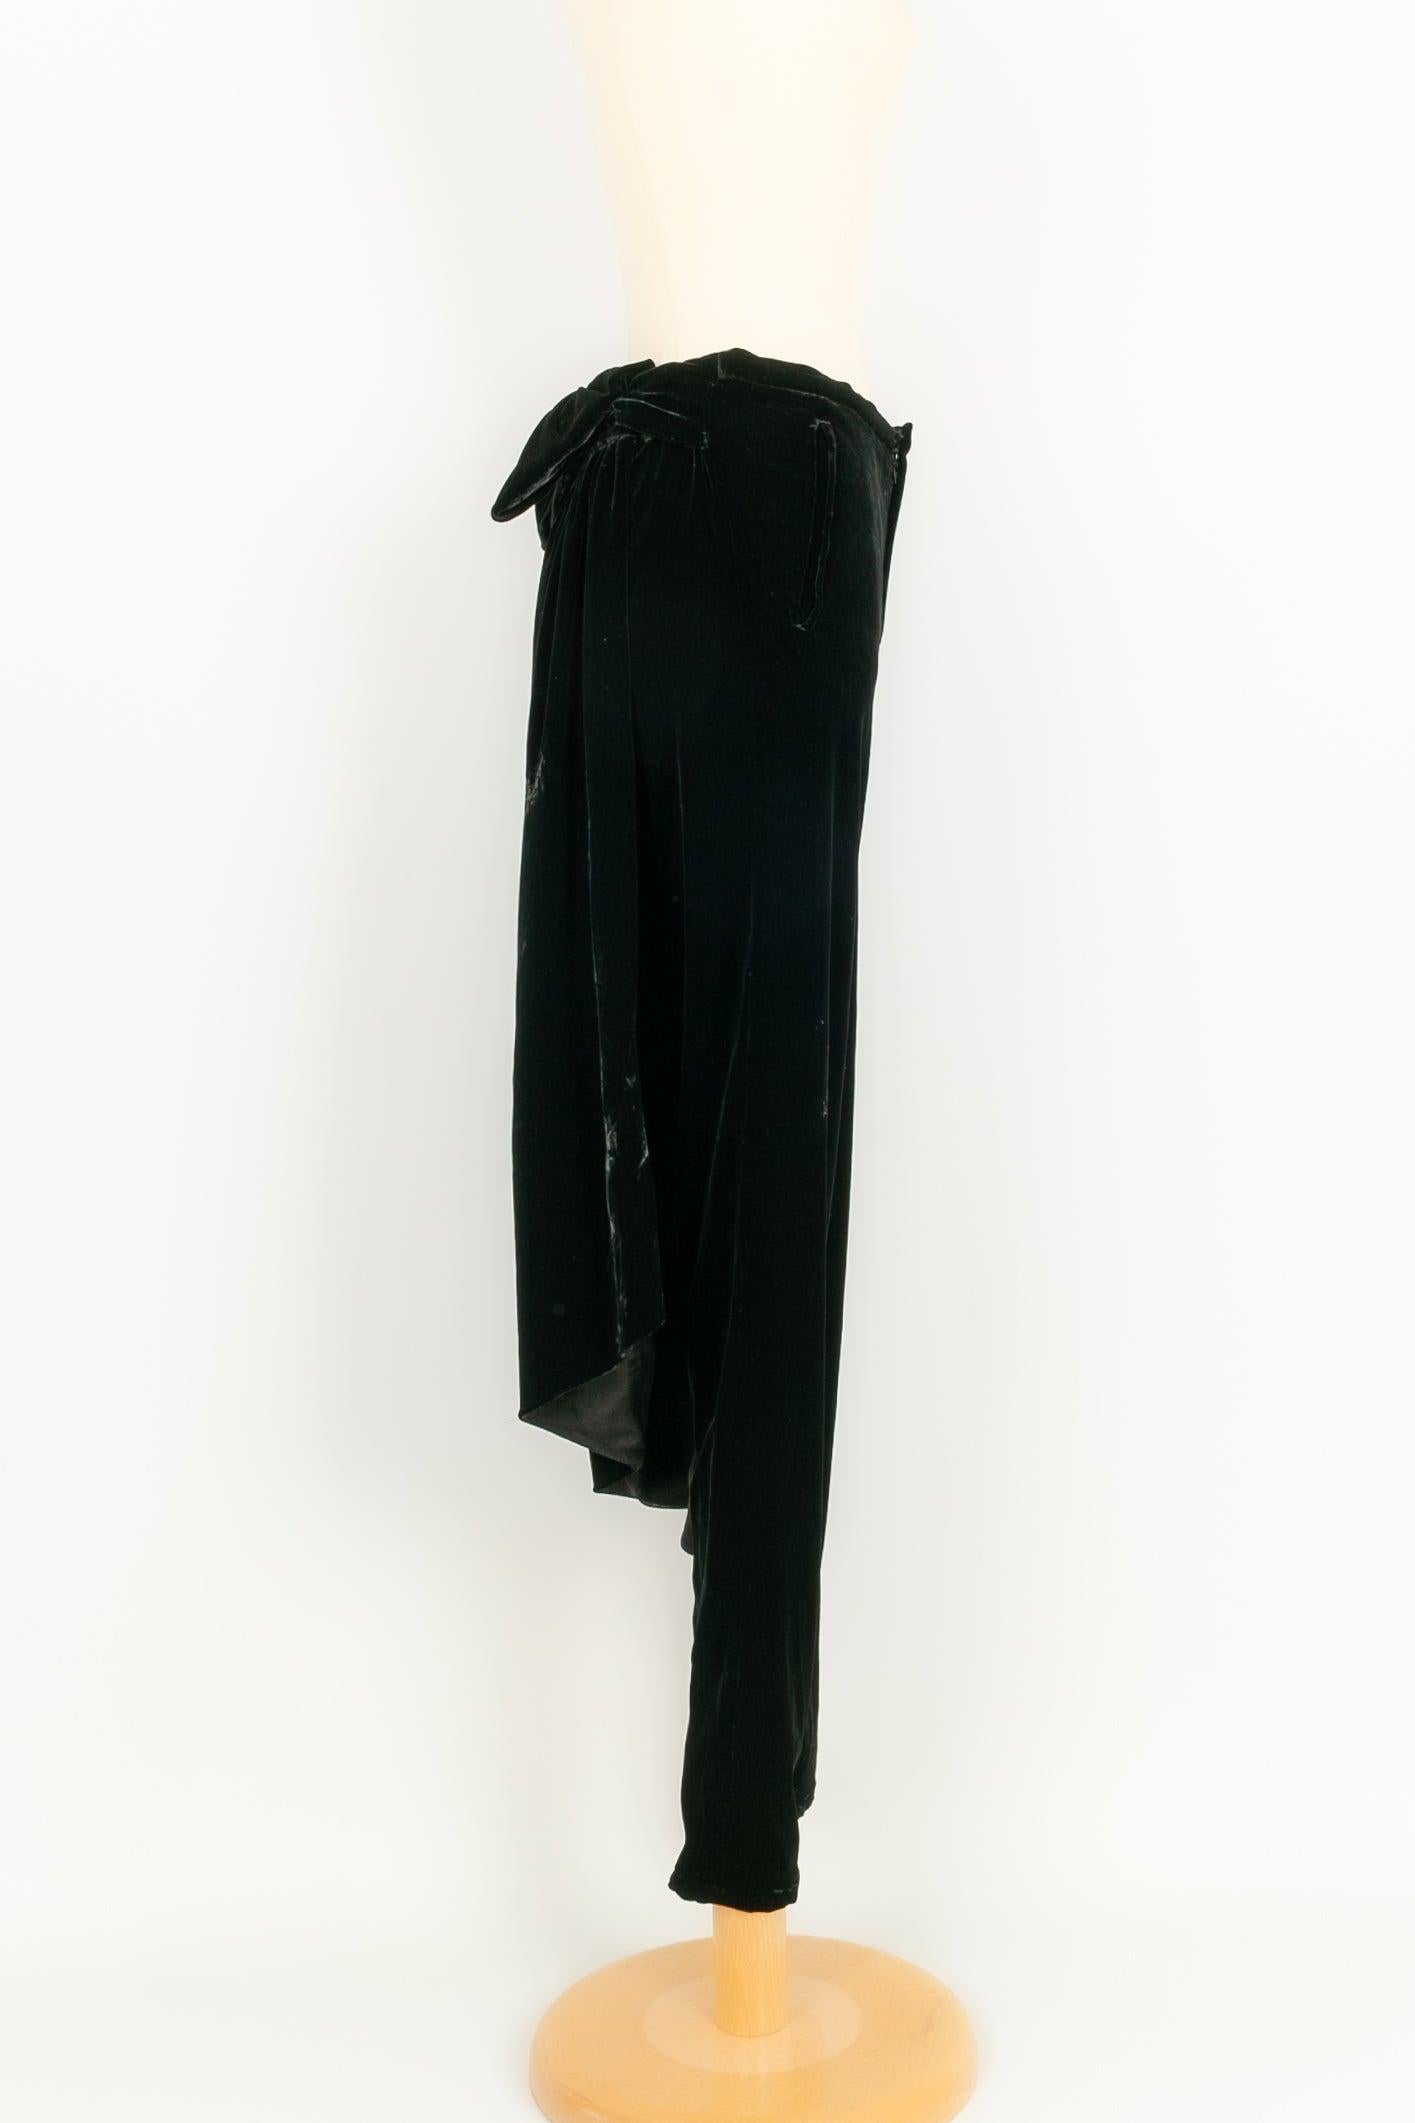 Jean-Paul Gaultier - (Made in Italy) Velvet pant with bow on the front and back closure. Size 36FR.

Additional information: 

Dimensions: 
Size: 37 cm, Length: 98 cm

Condition: Very good condition
Seller Ref number: FJ41